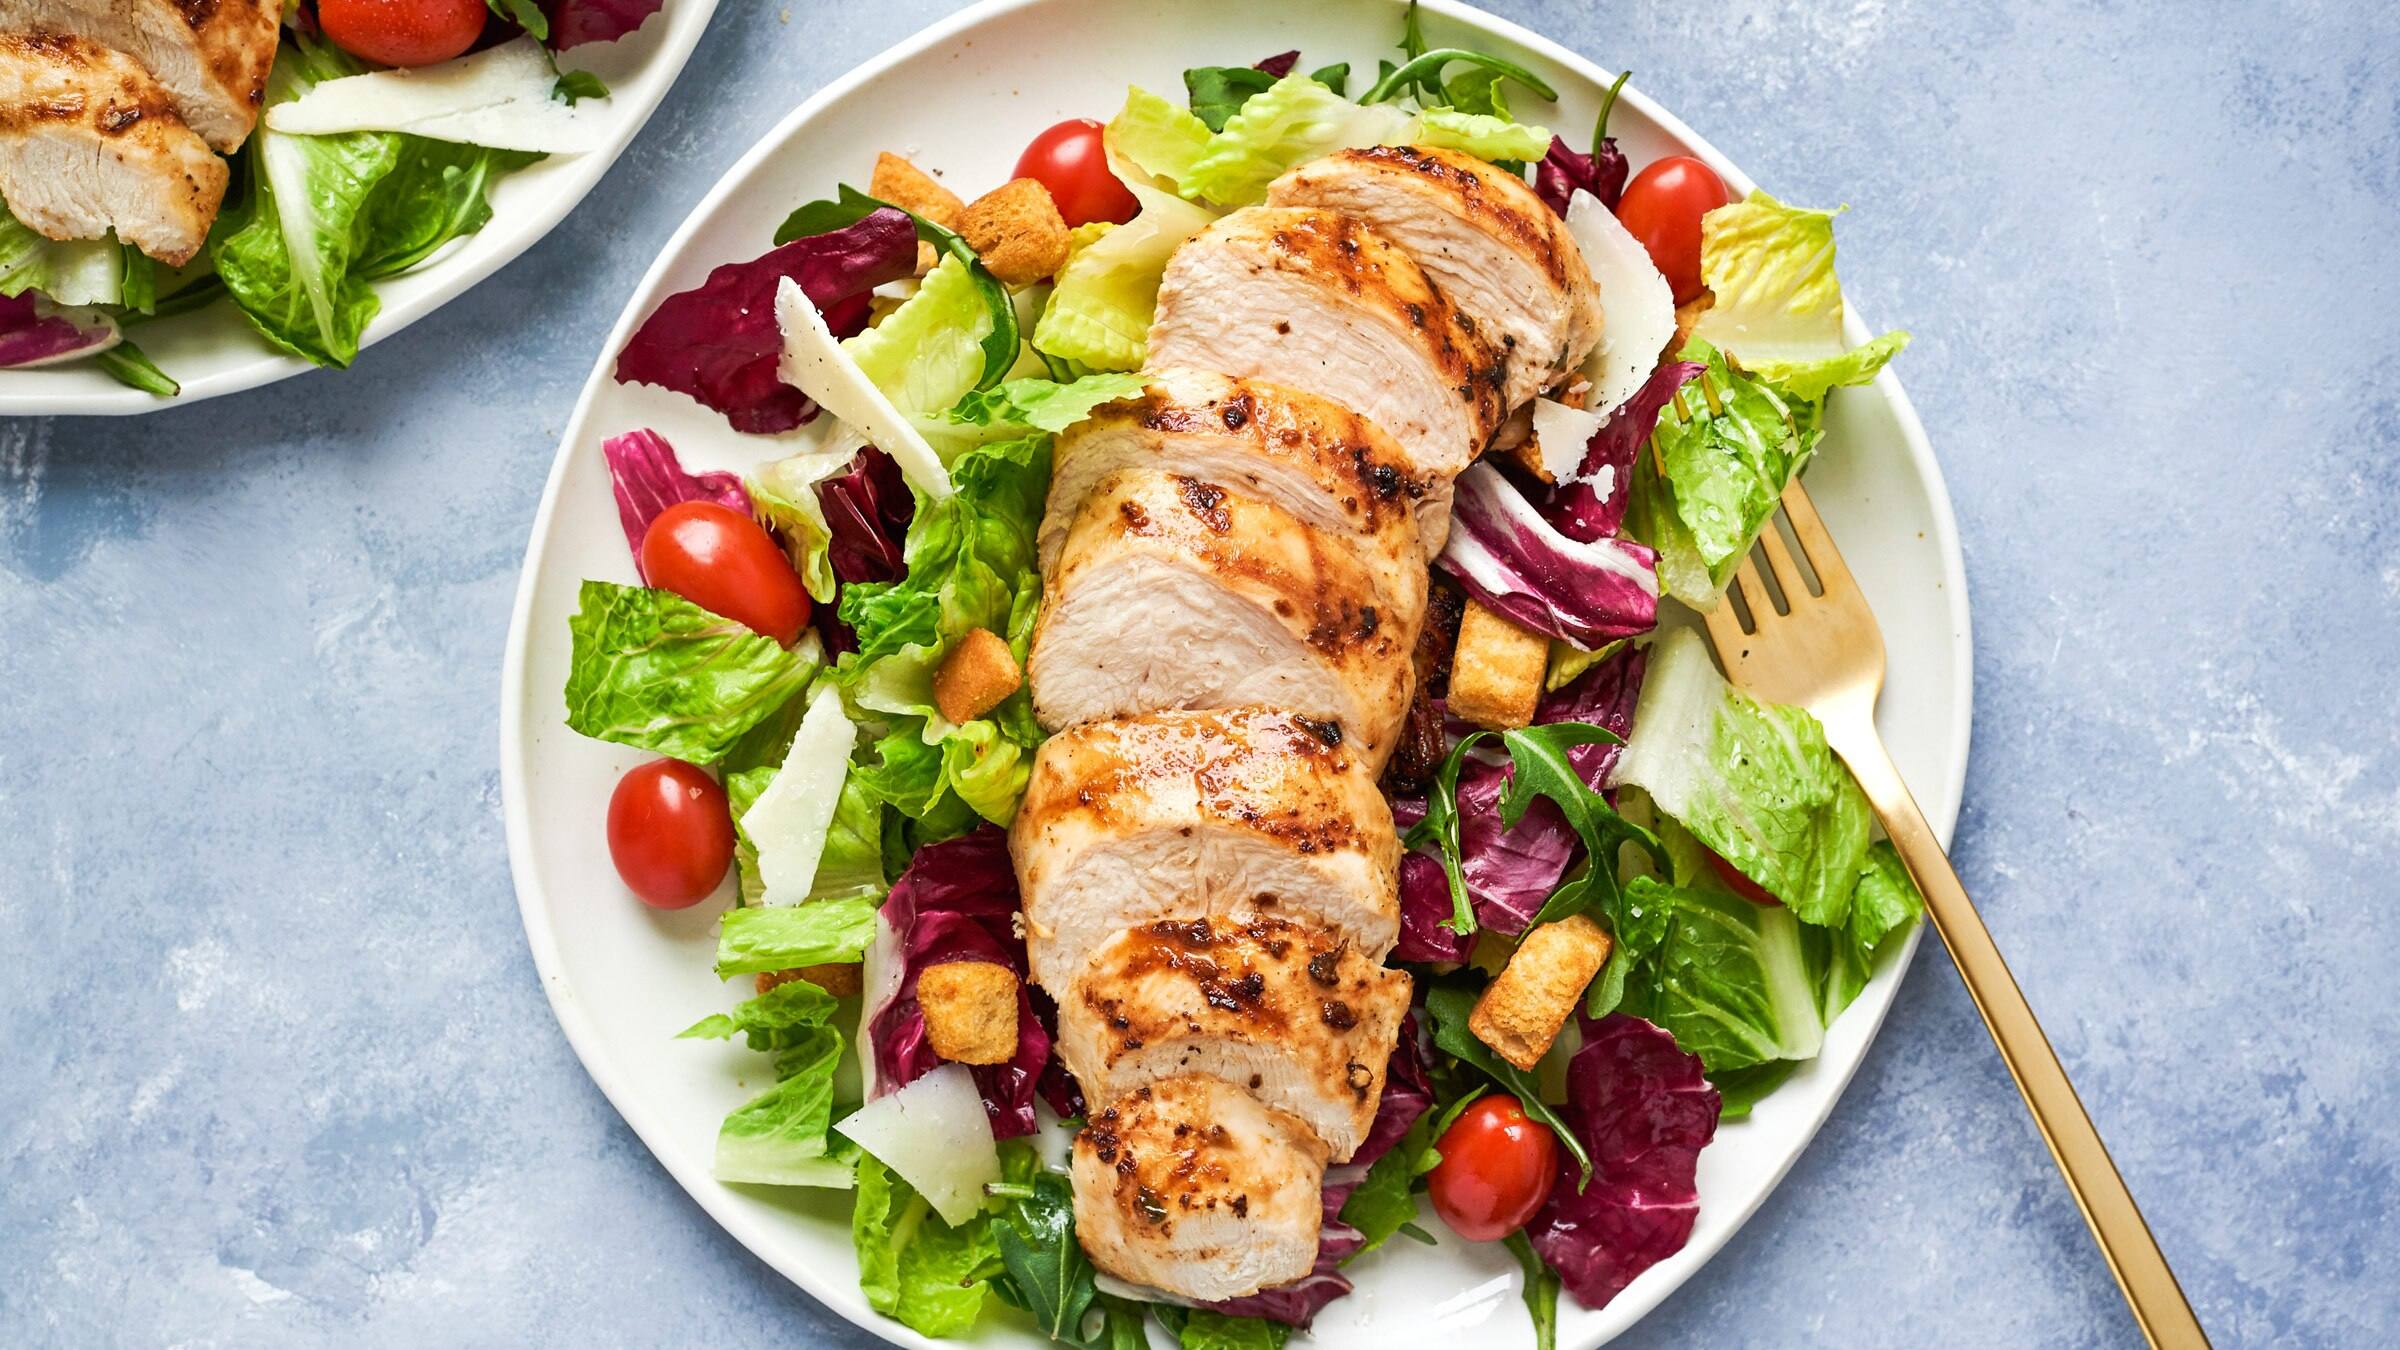 Succulent Grilled Italian Chicken over Greens